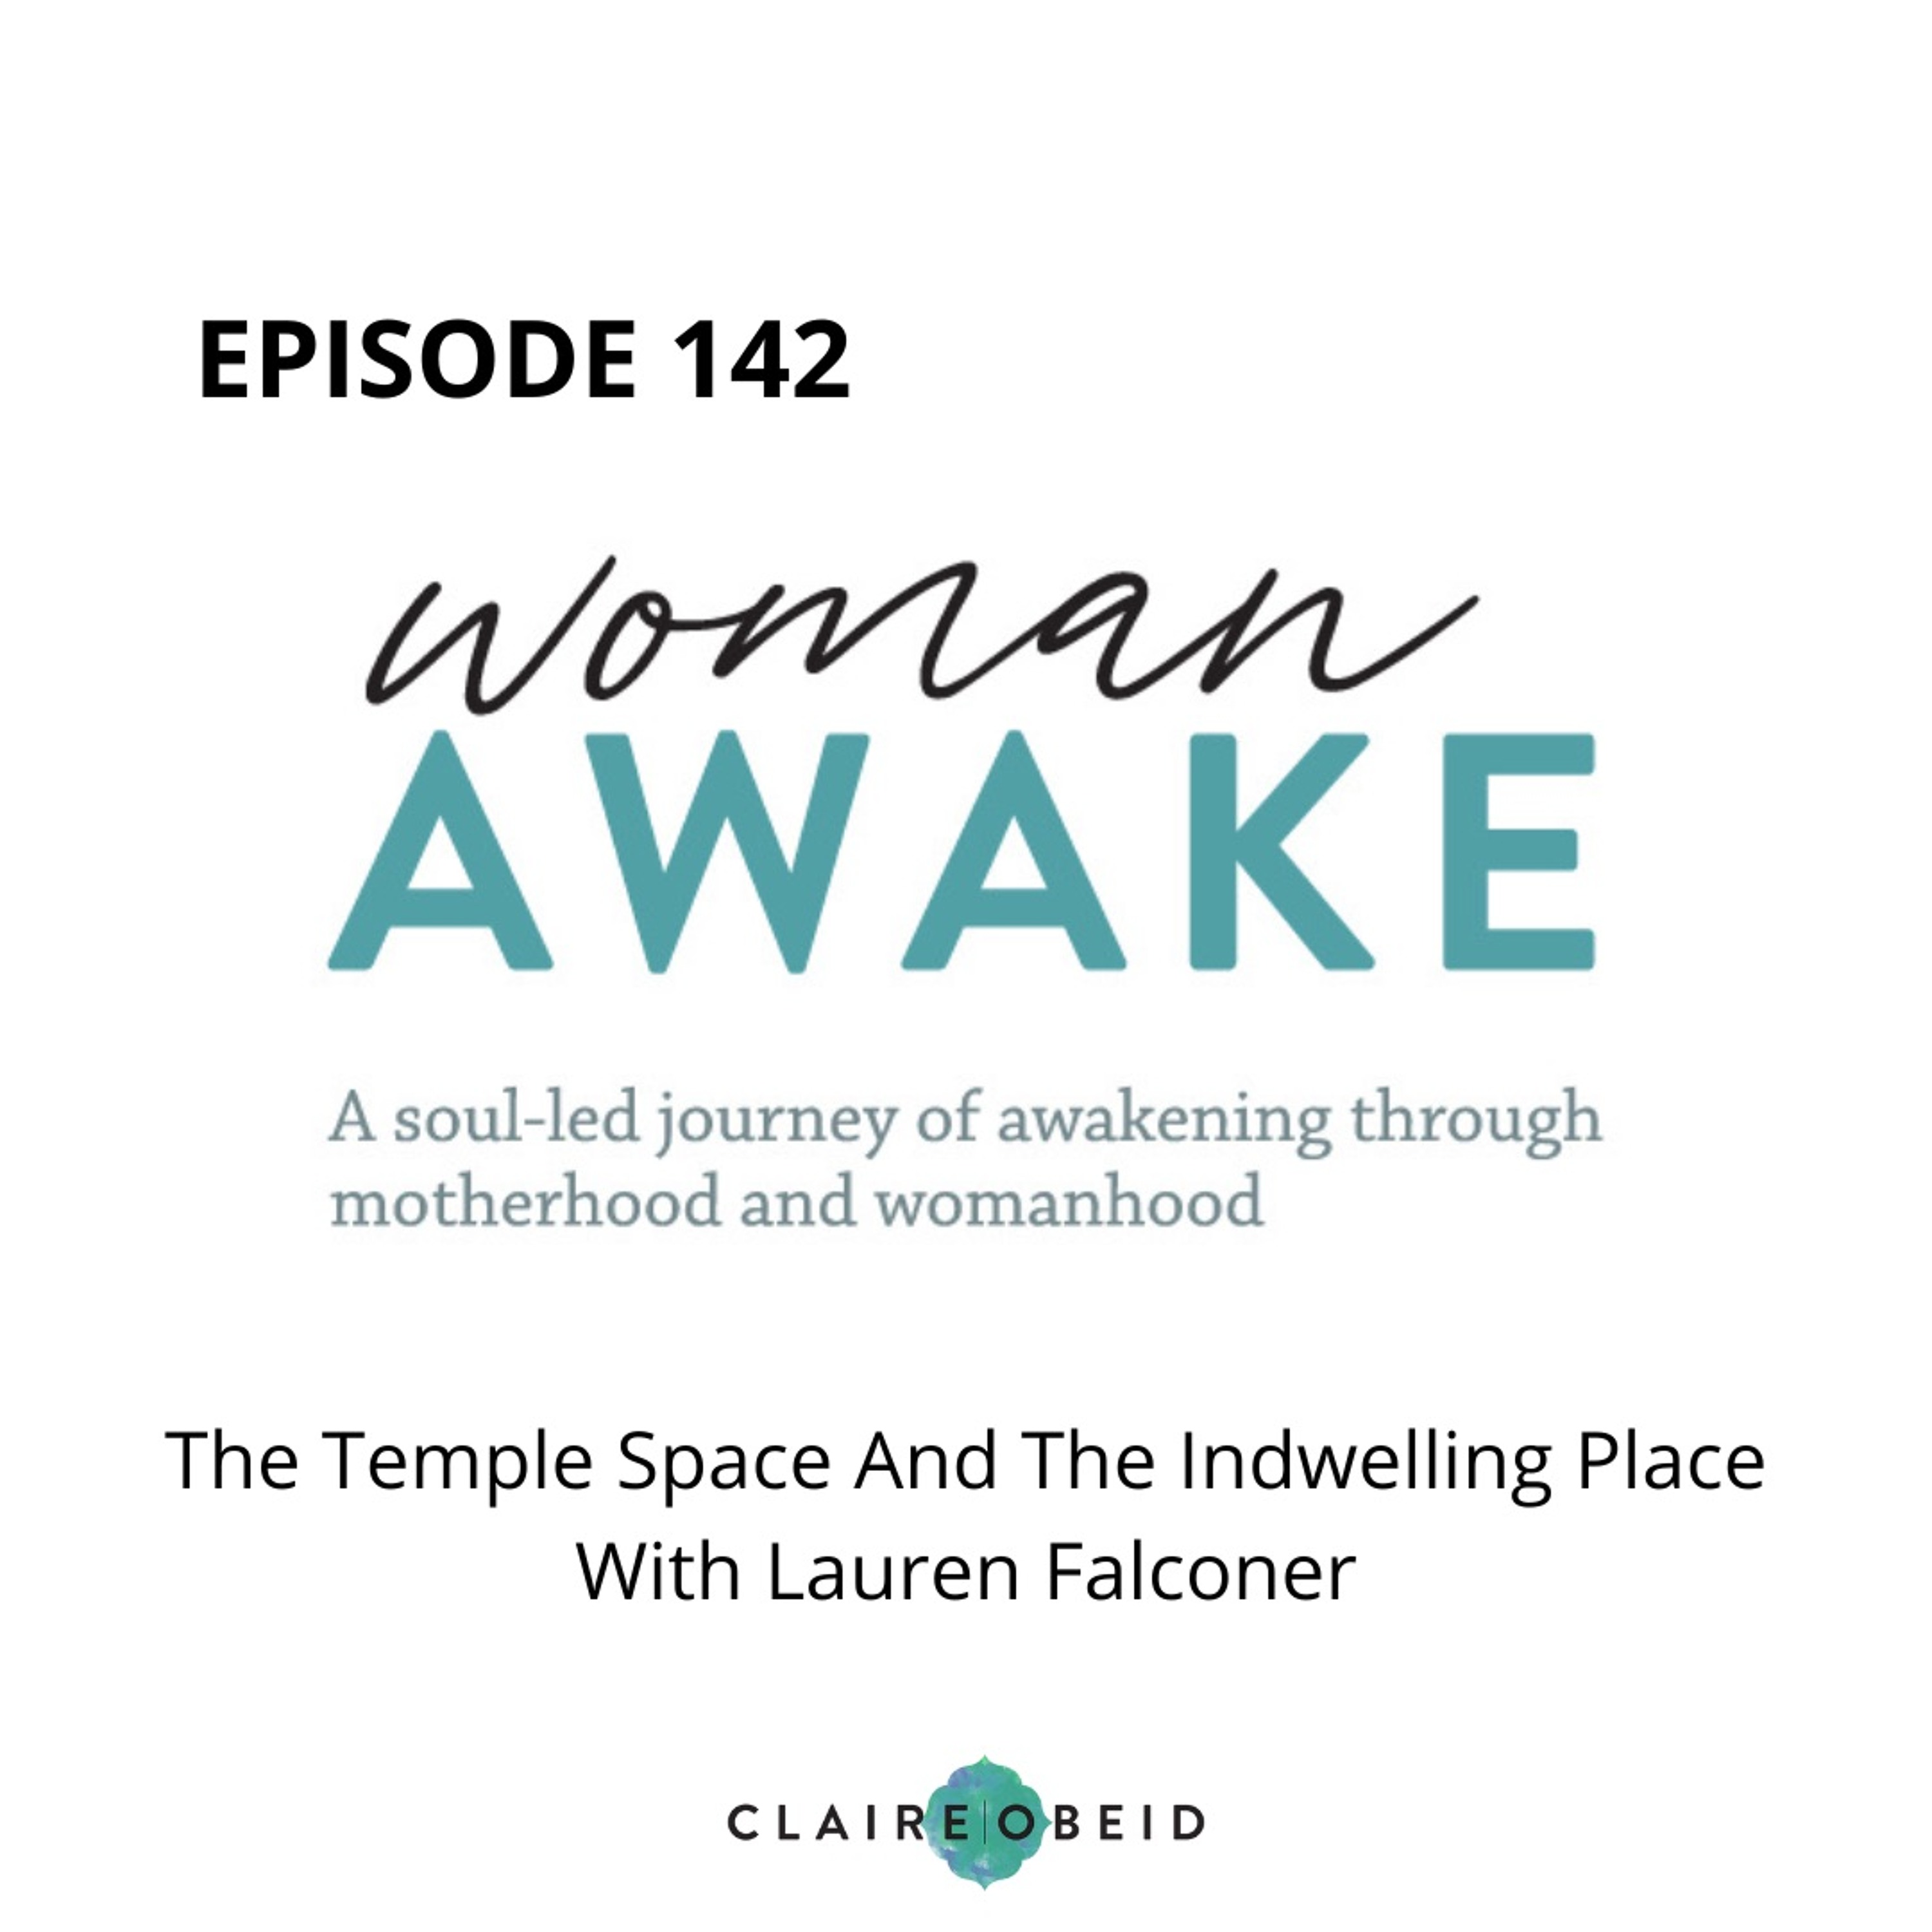 Woman Awake Episode 142 - The Temple Space And The Indwelling Place With Lauren Falconer